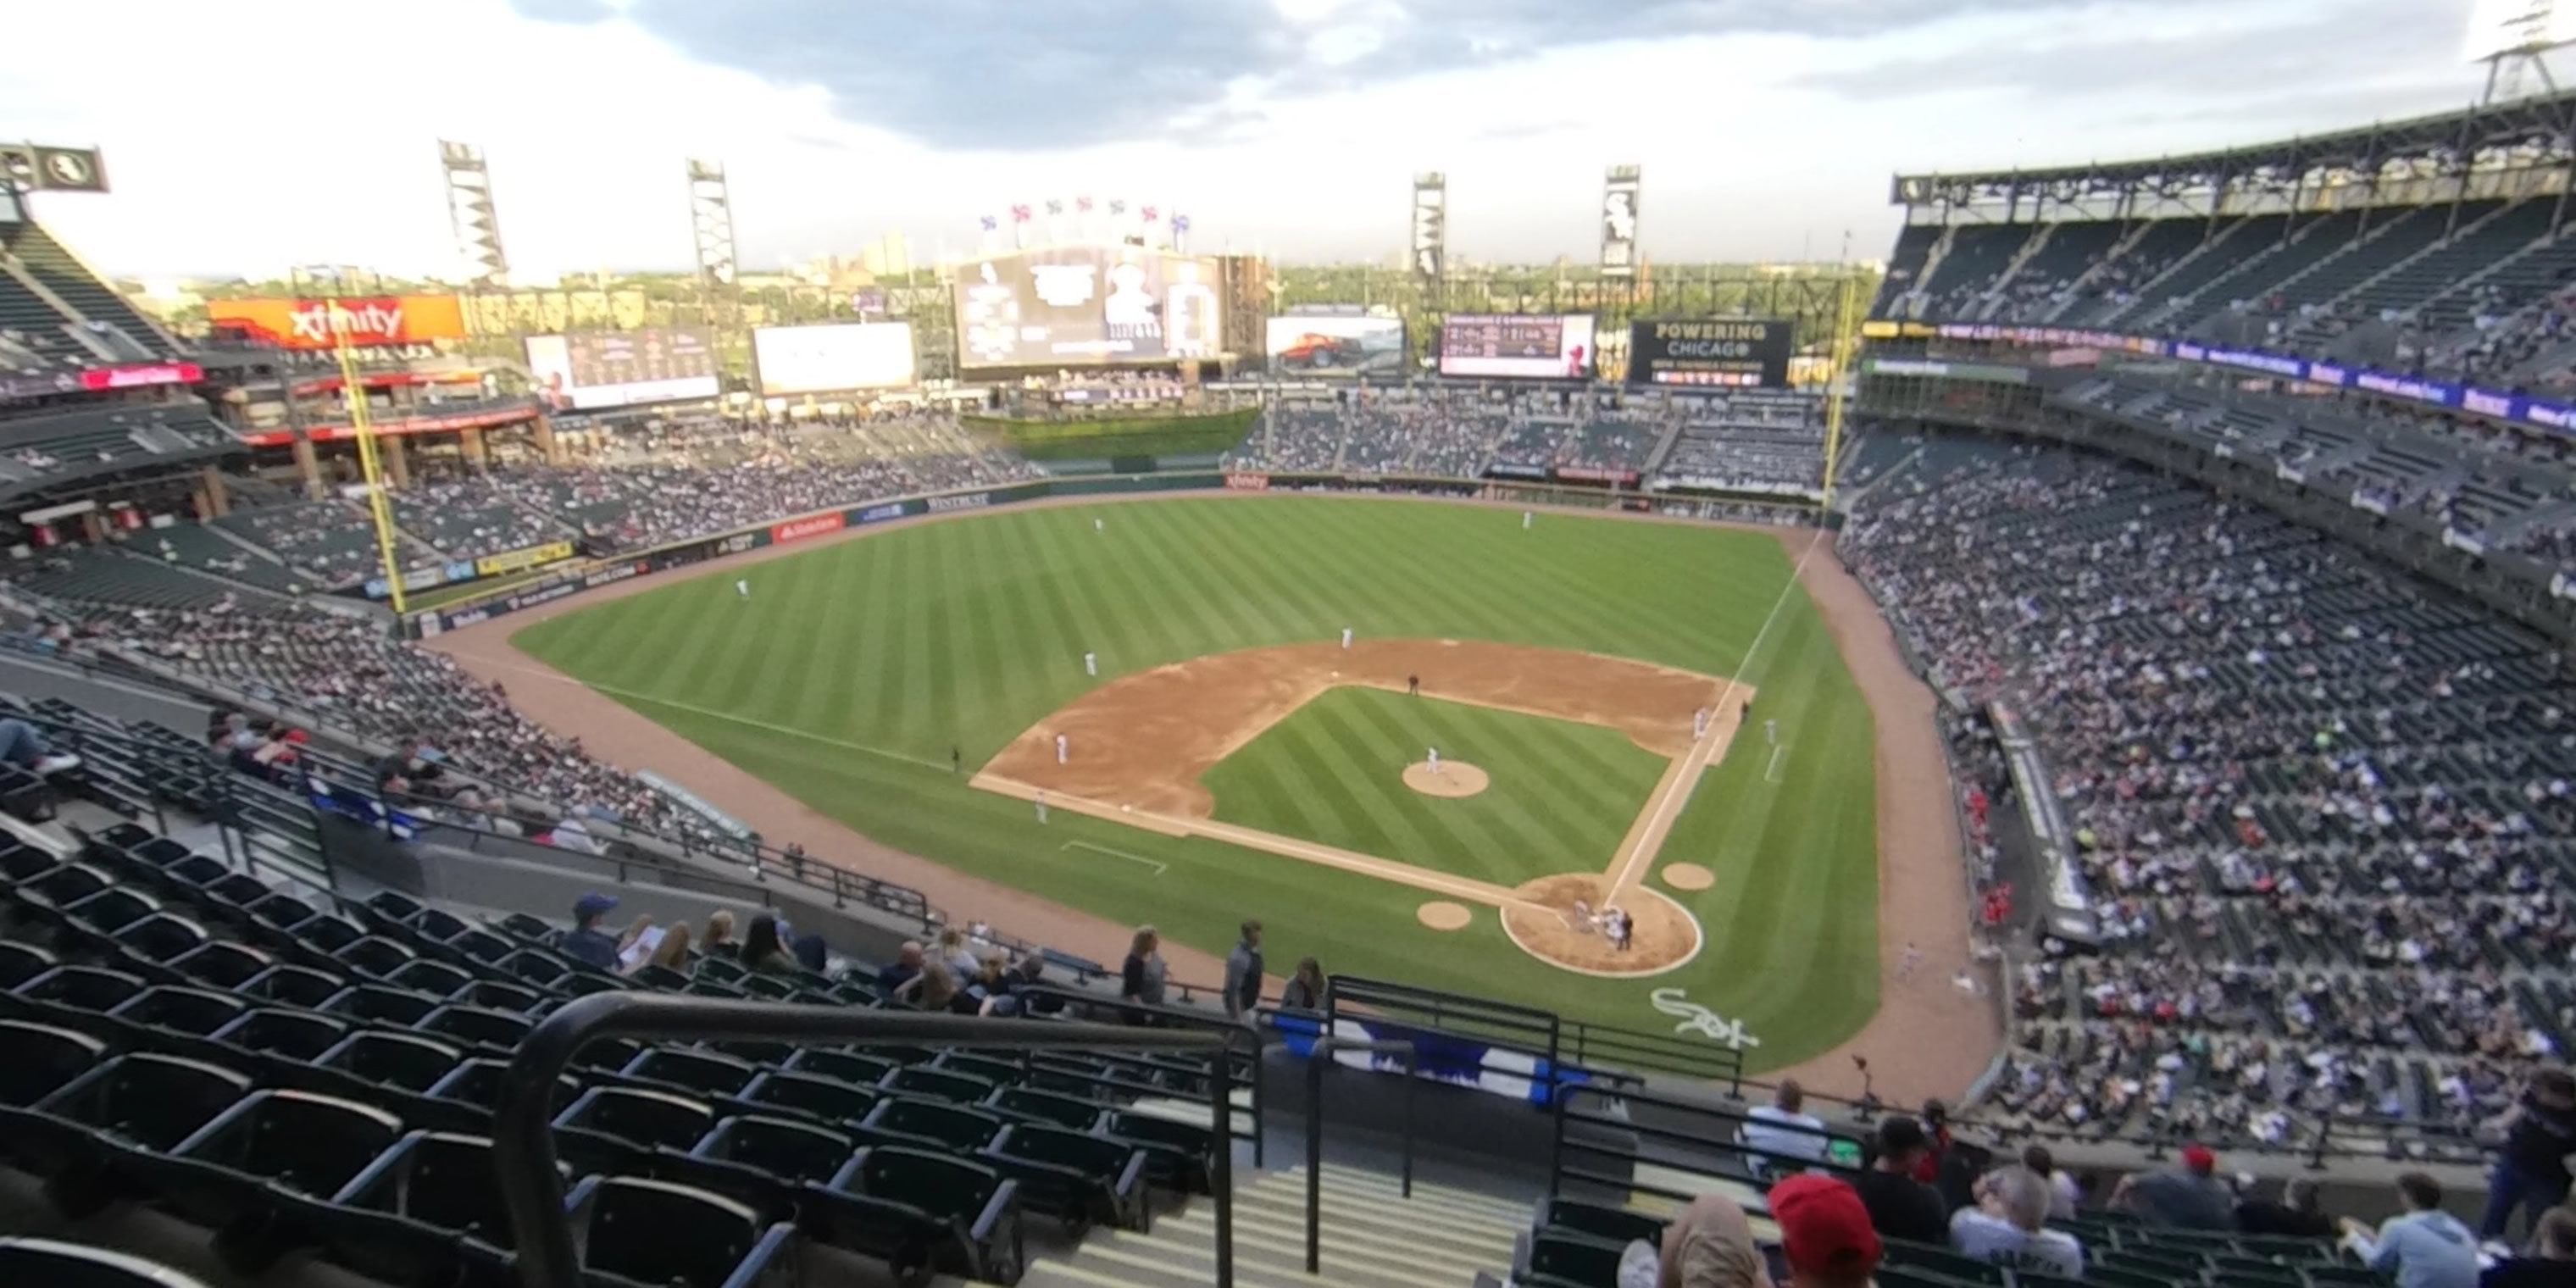 section 535 panoramic seat view  - guaranteed rate field